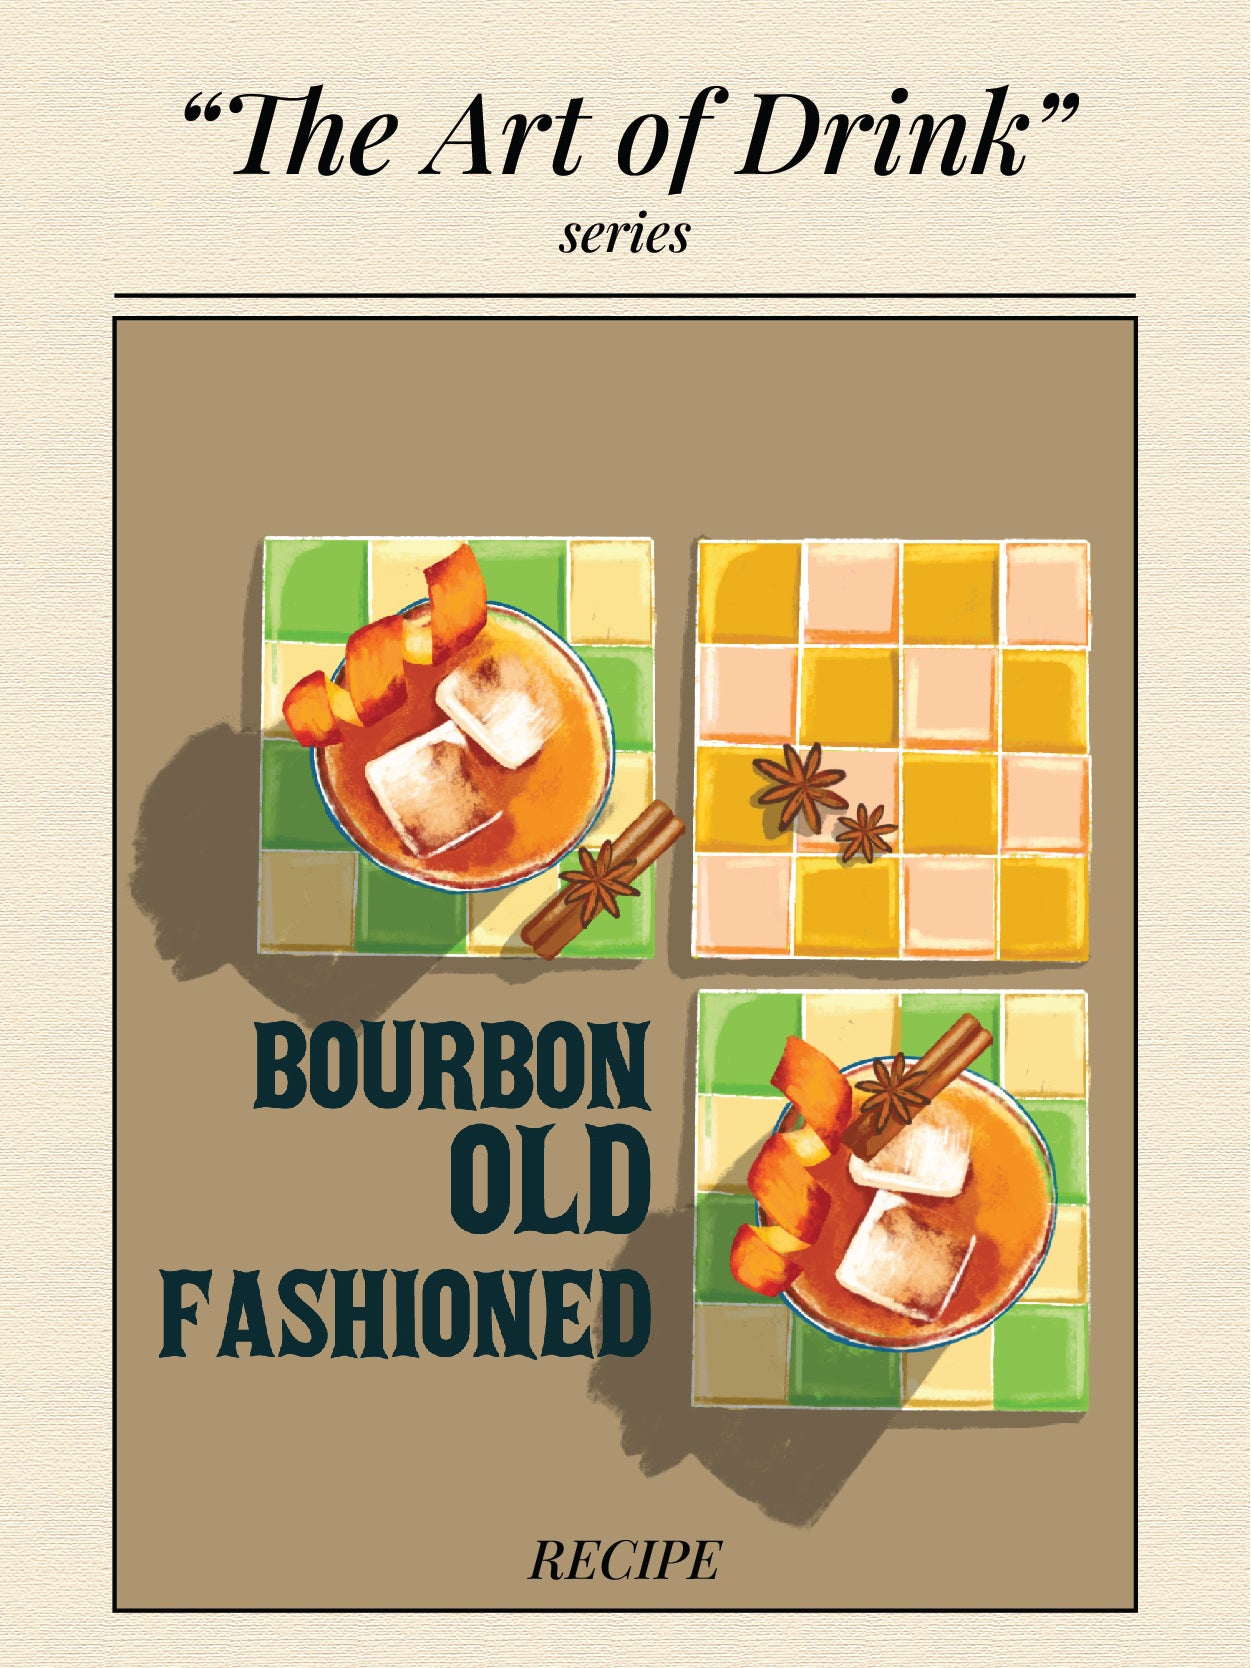 BOURBON OLD FASHIONED - "The Art of Drink" series